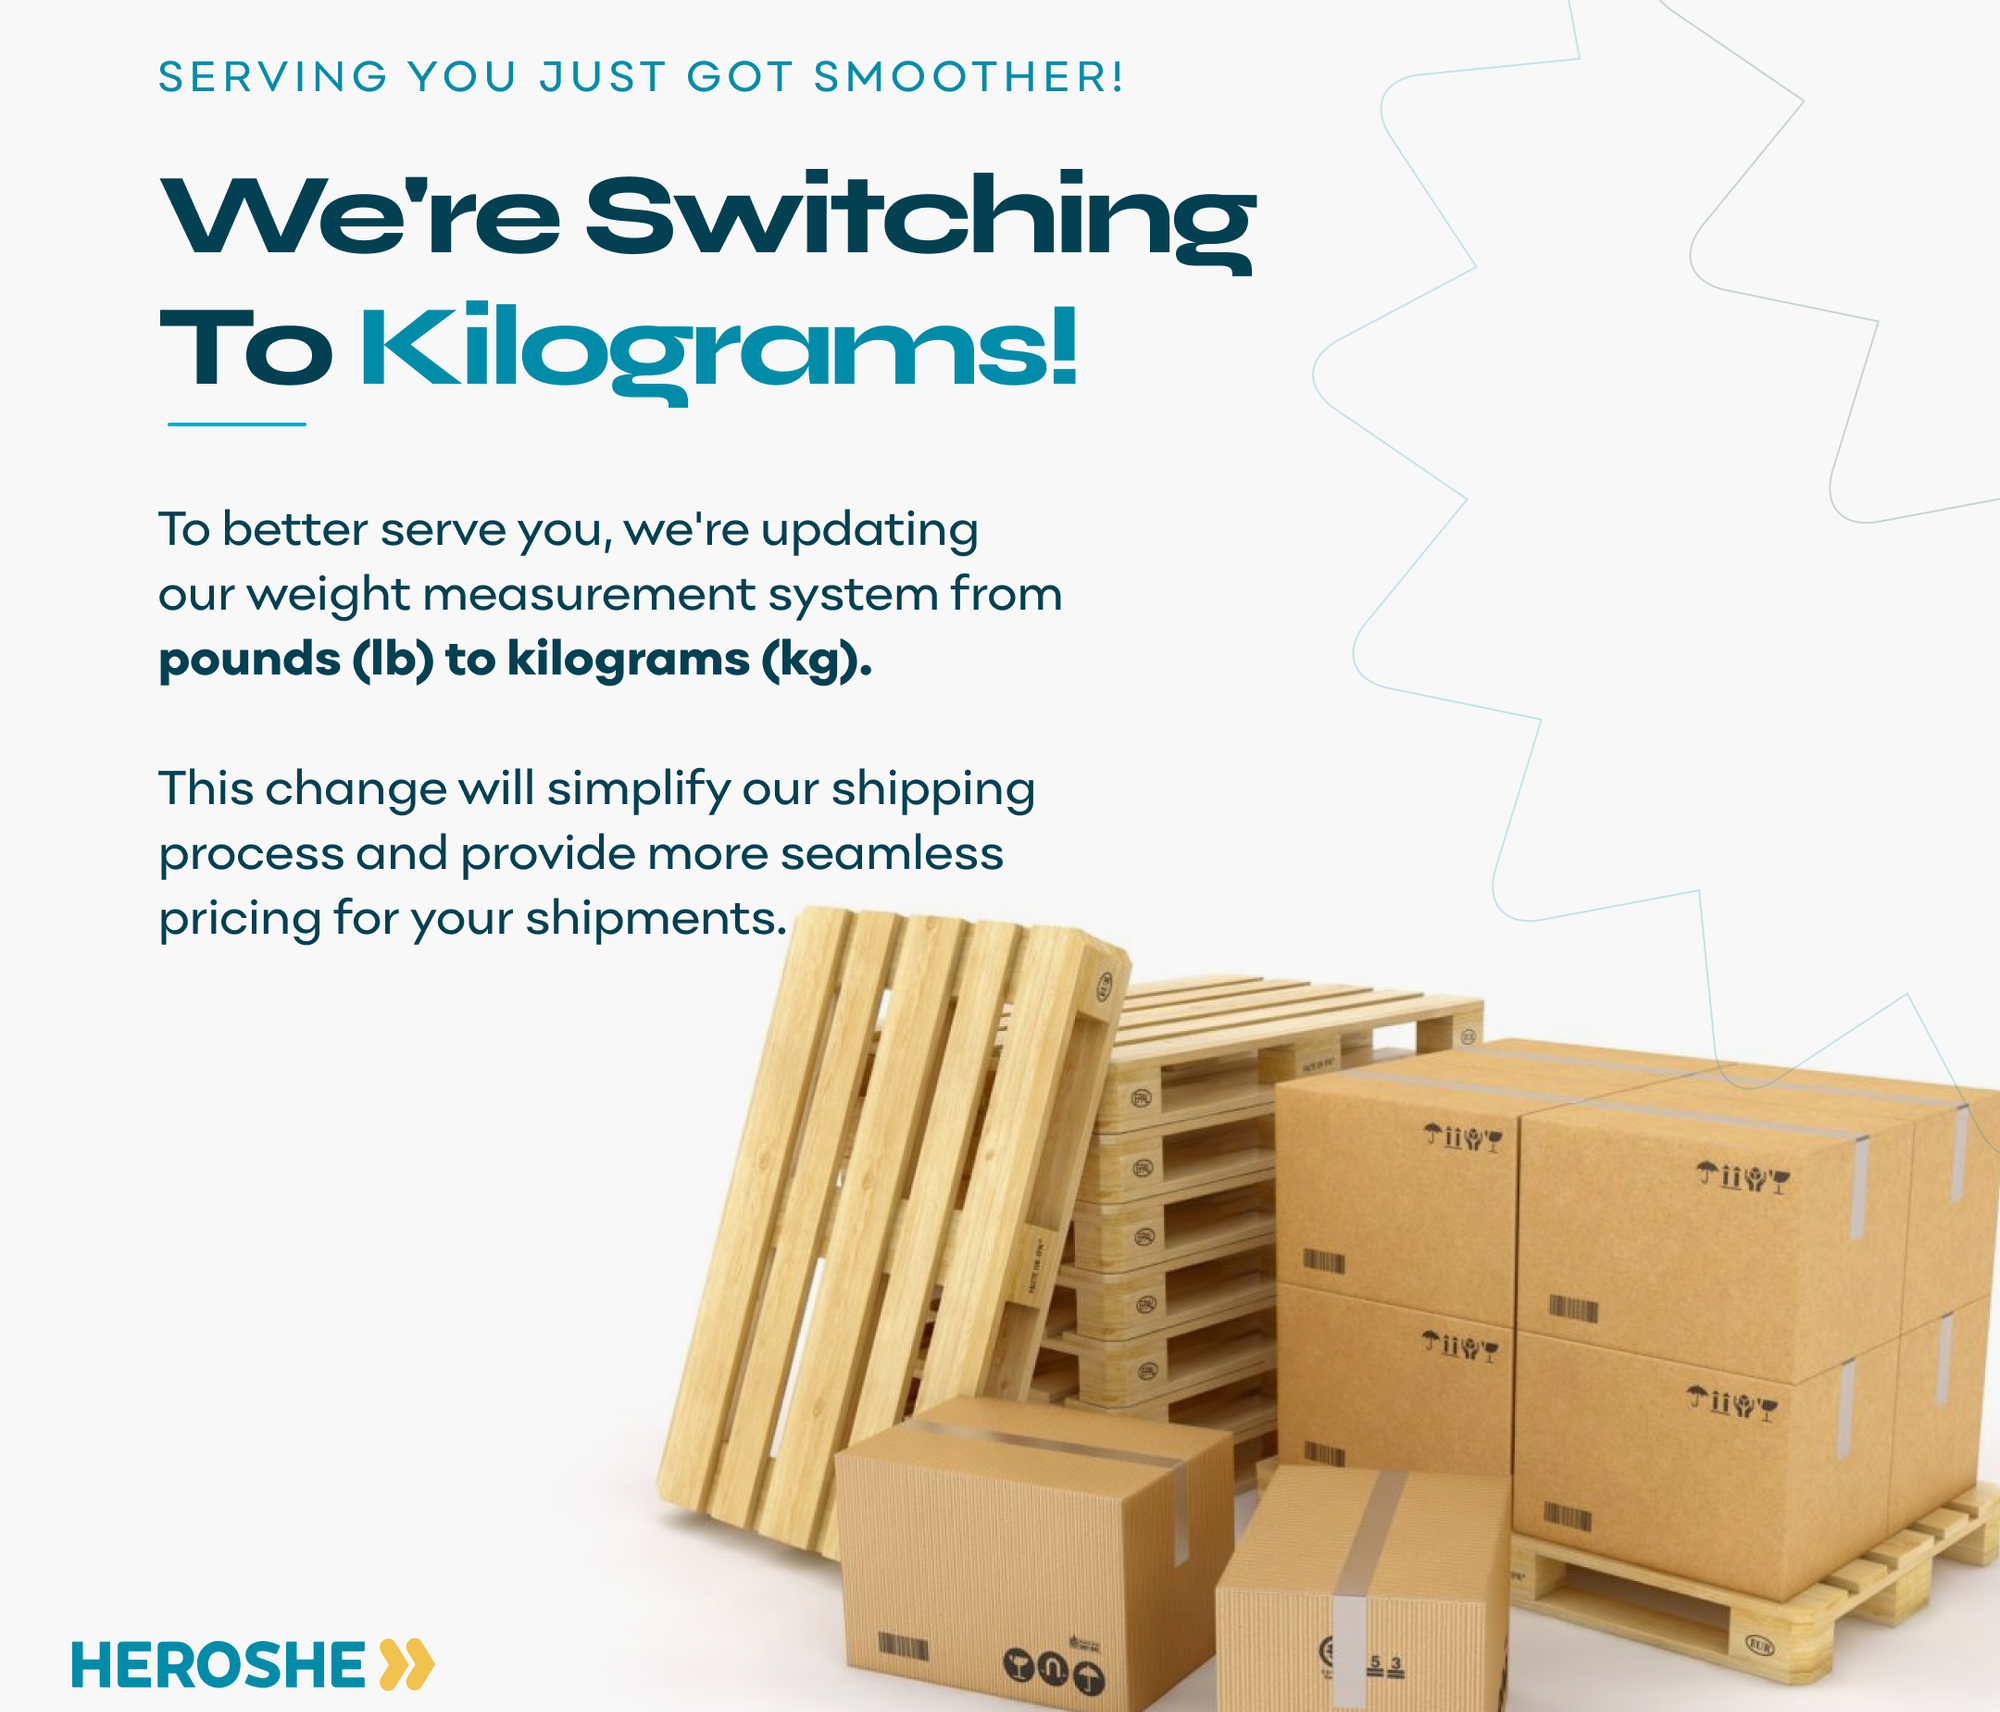 We Are Switching To Kilograms!